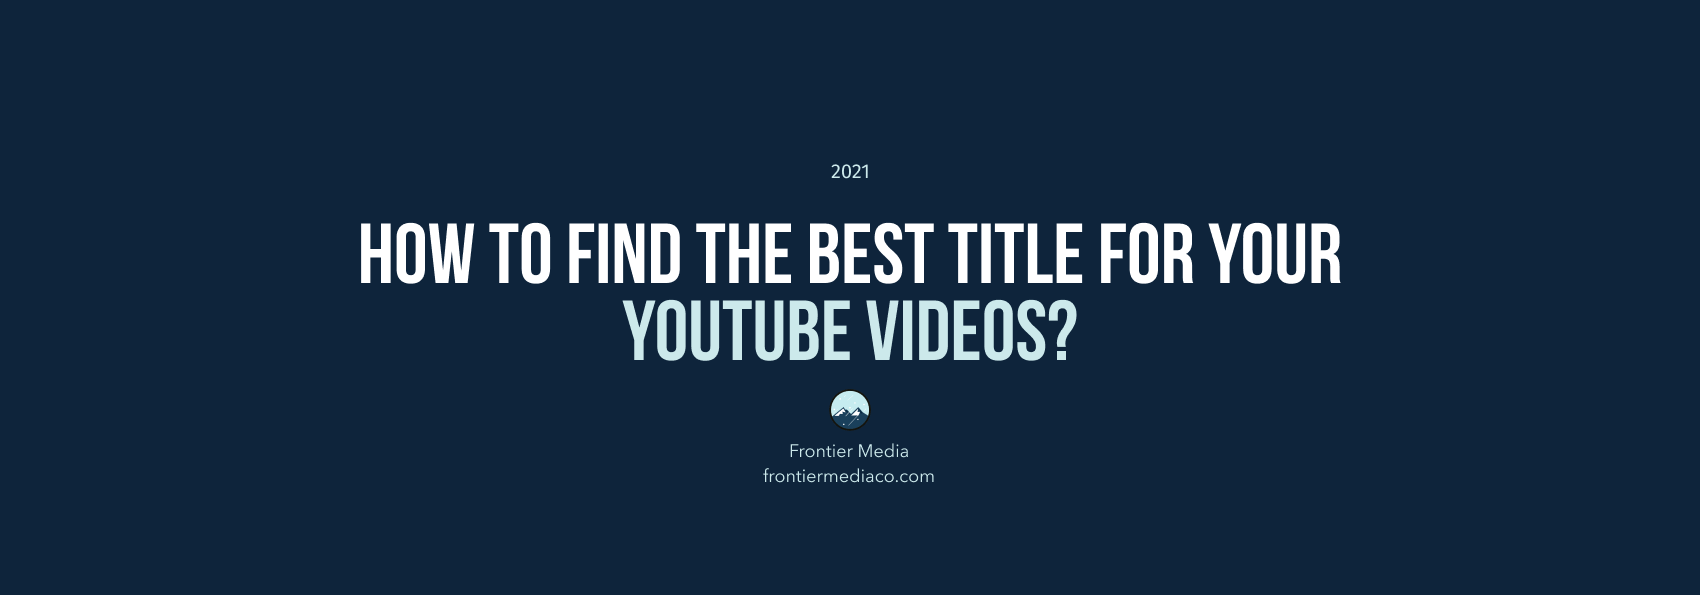 How to Find the Best Title for Your YouTube Videos?